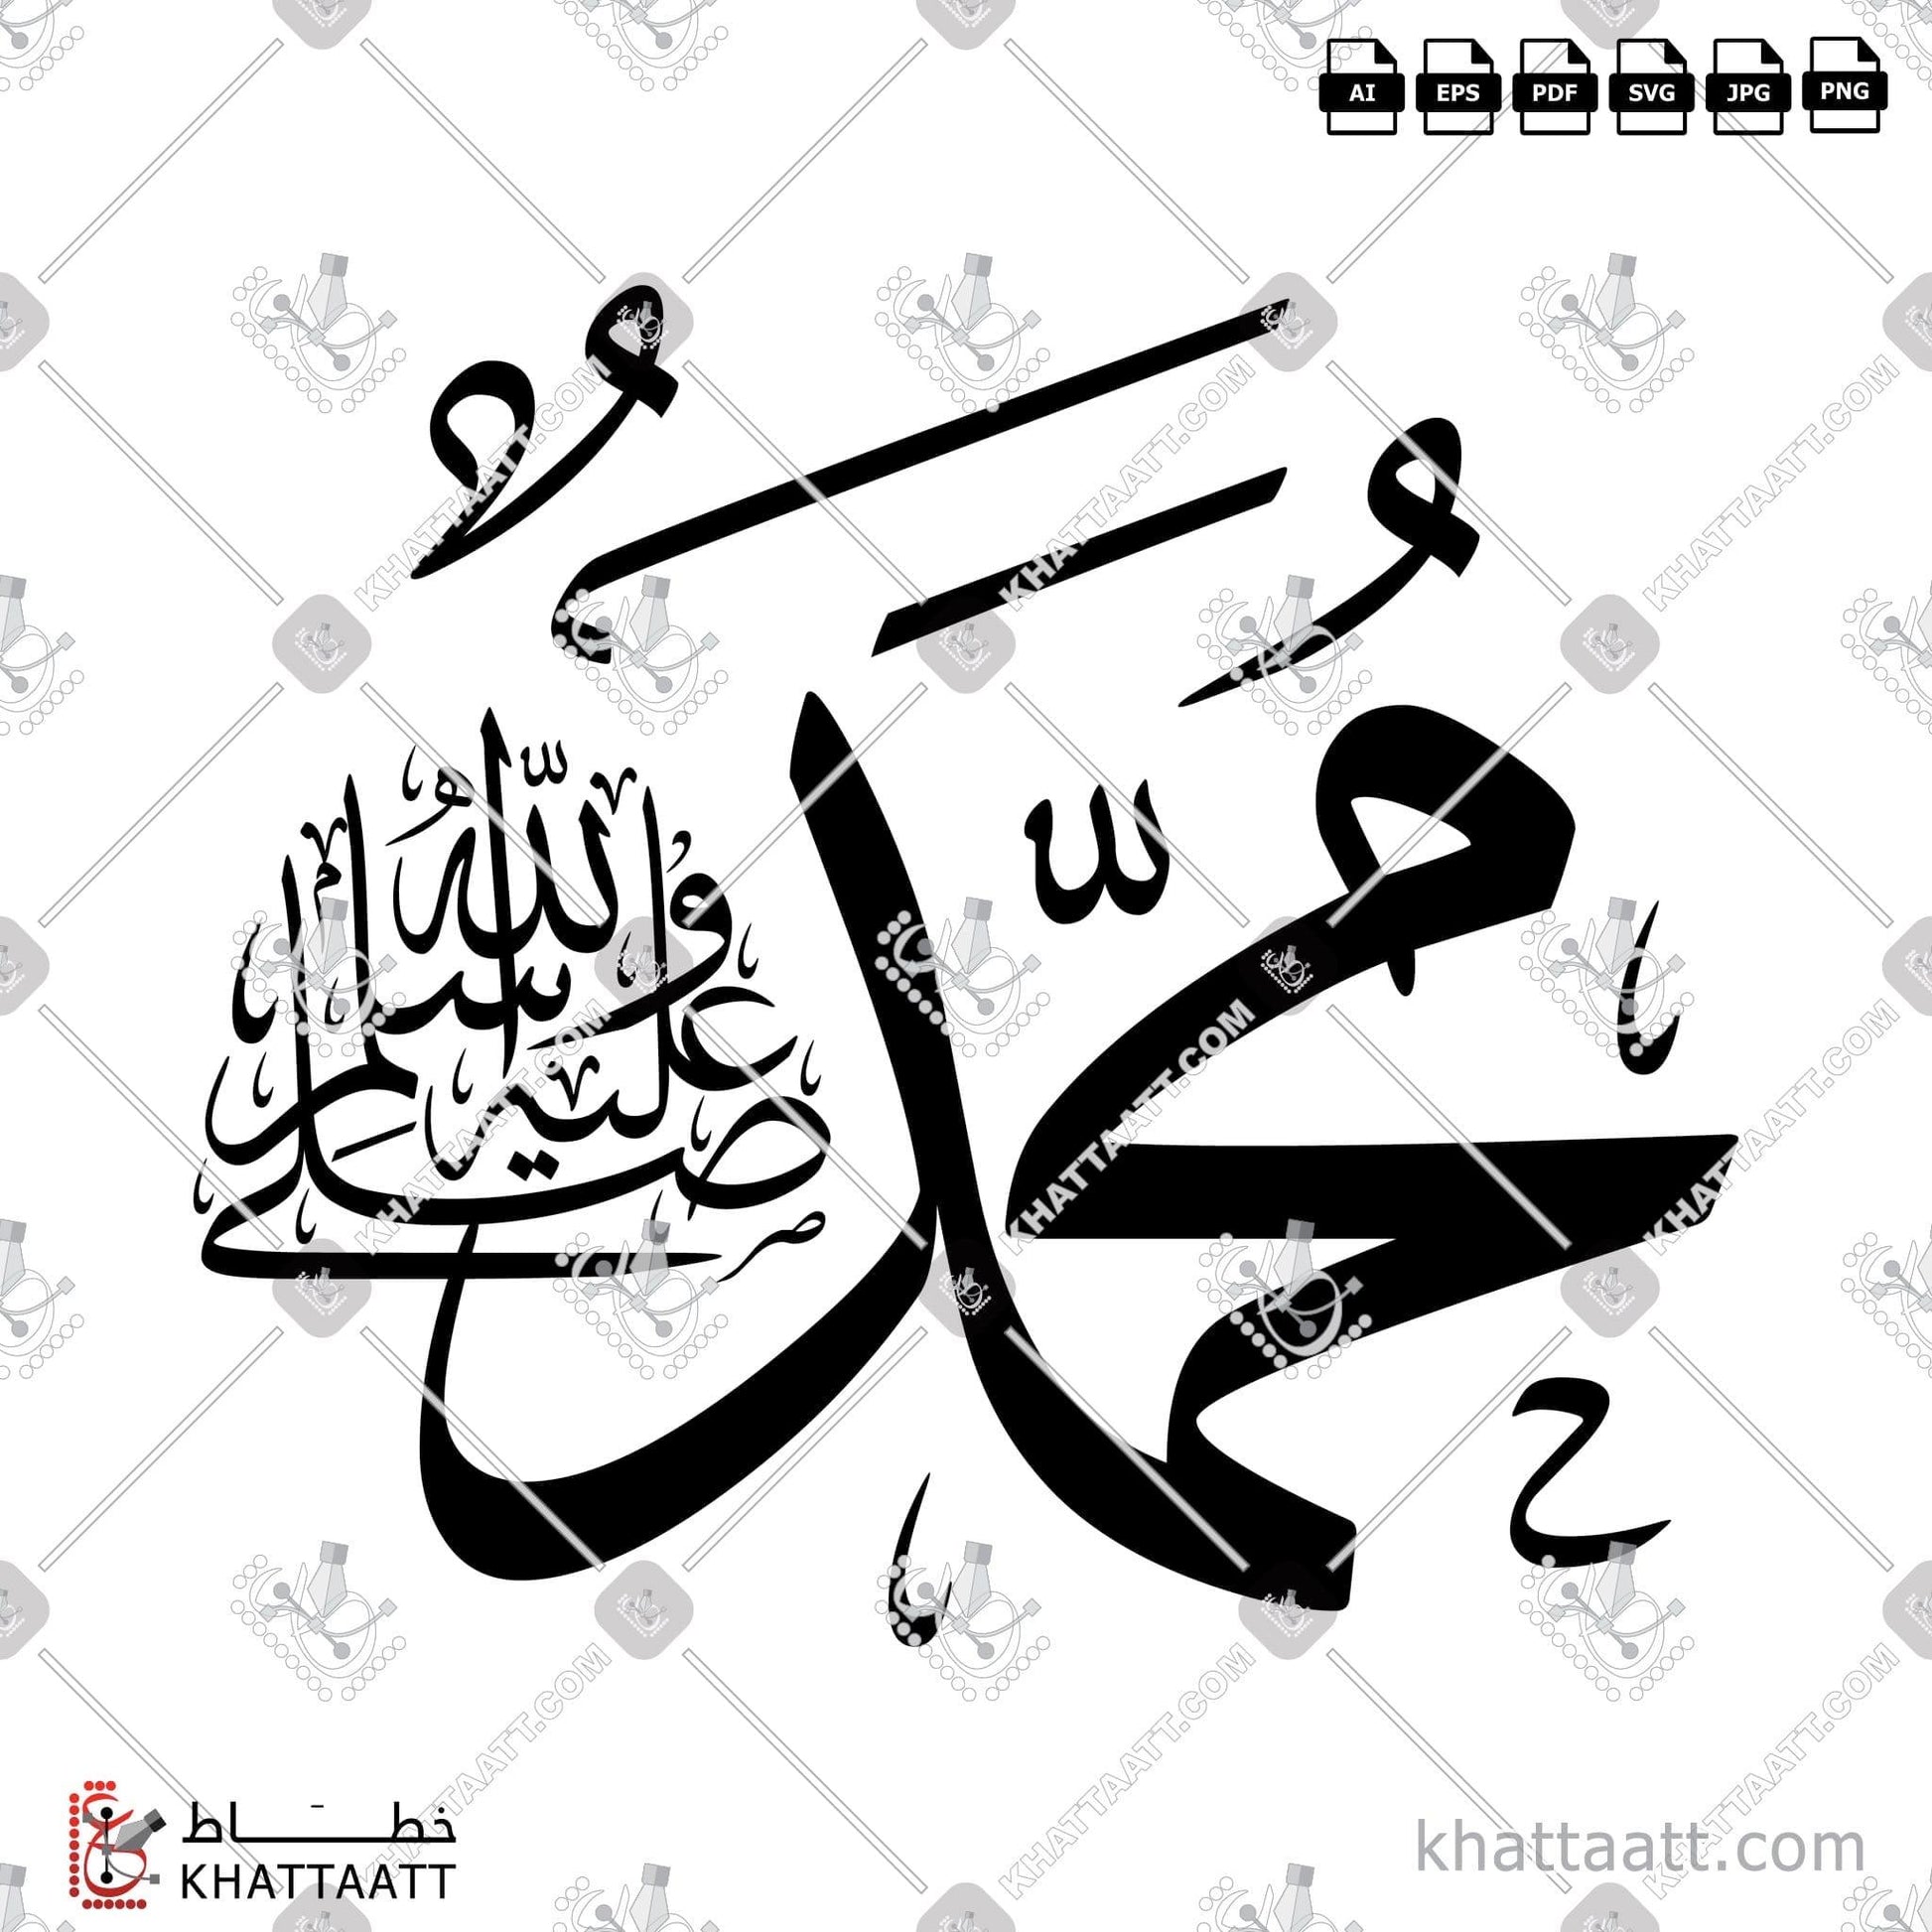 Download Arabic Calligraphy of Muhammad (ﷺ) سيدنا محمد in Thuluth - خط الثلث in vector and .png